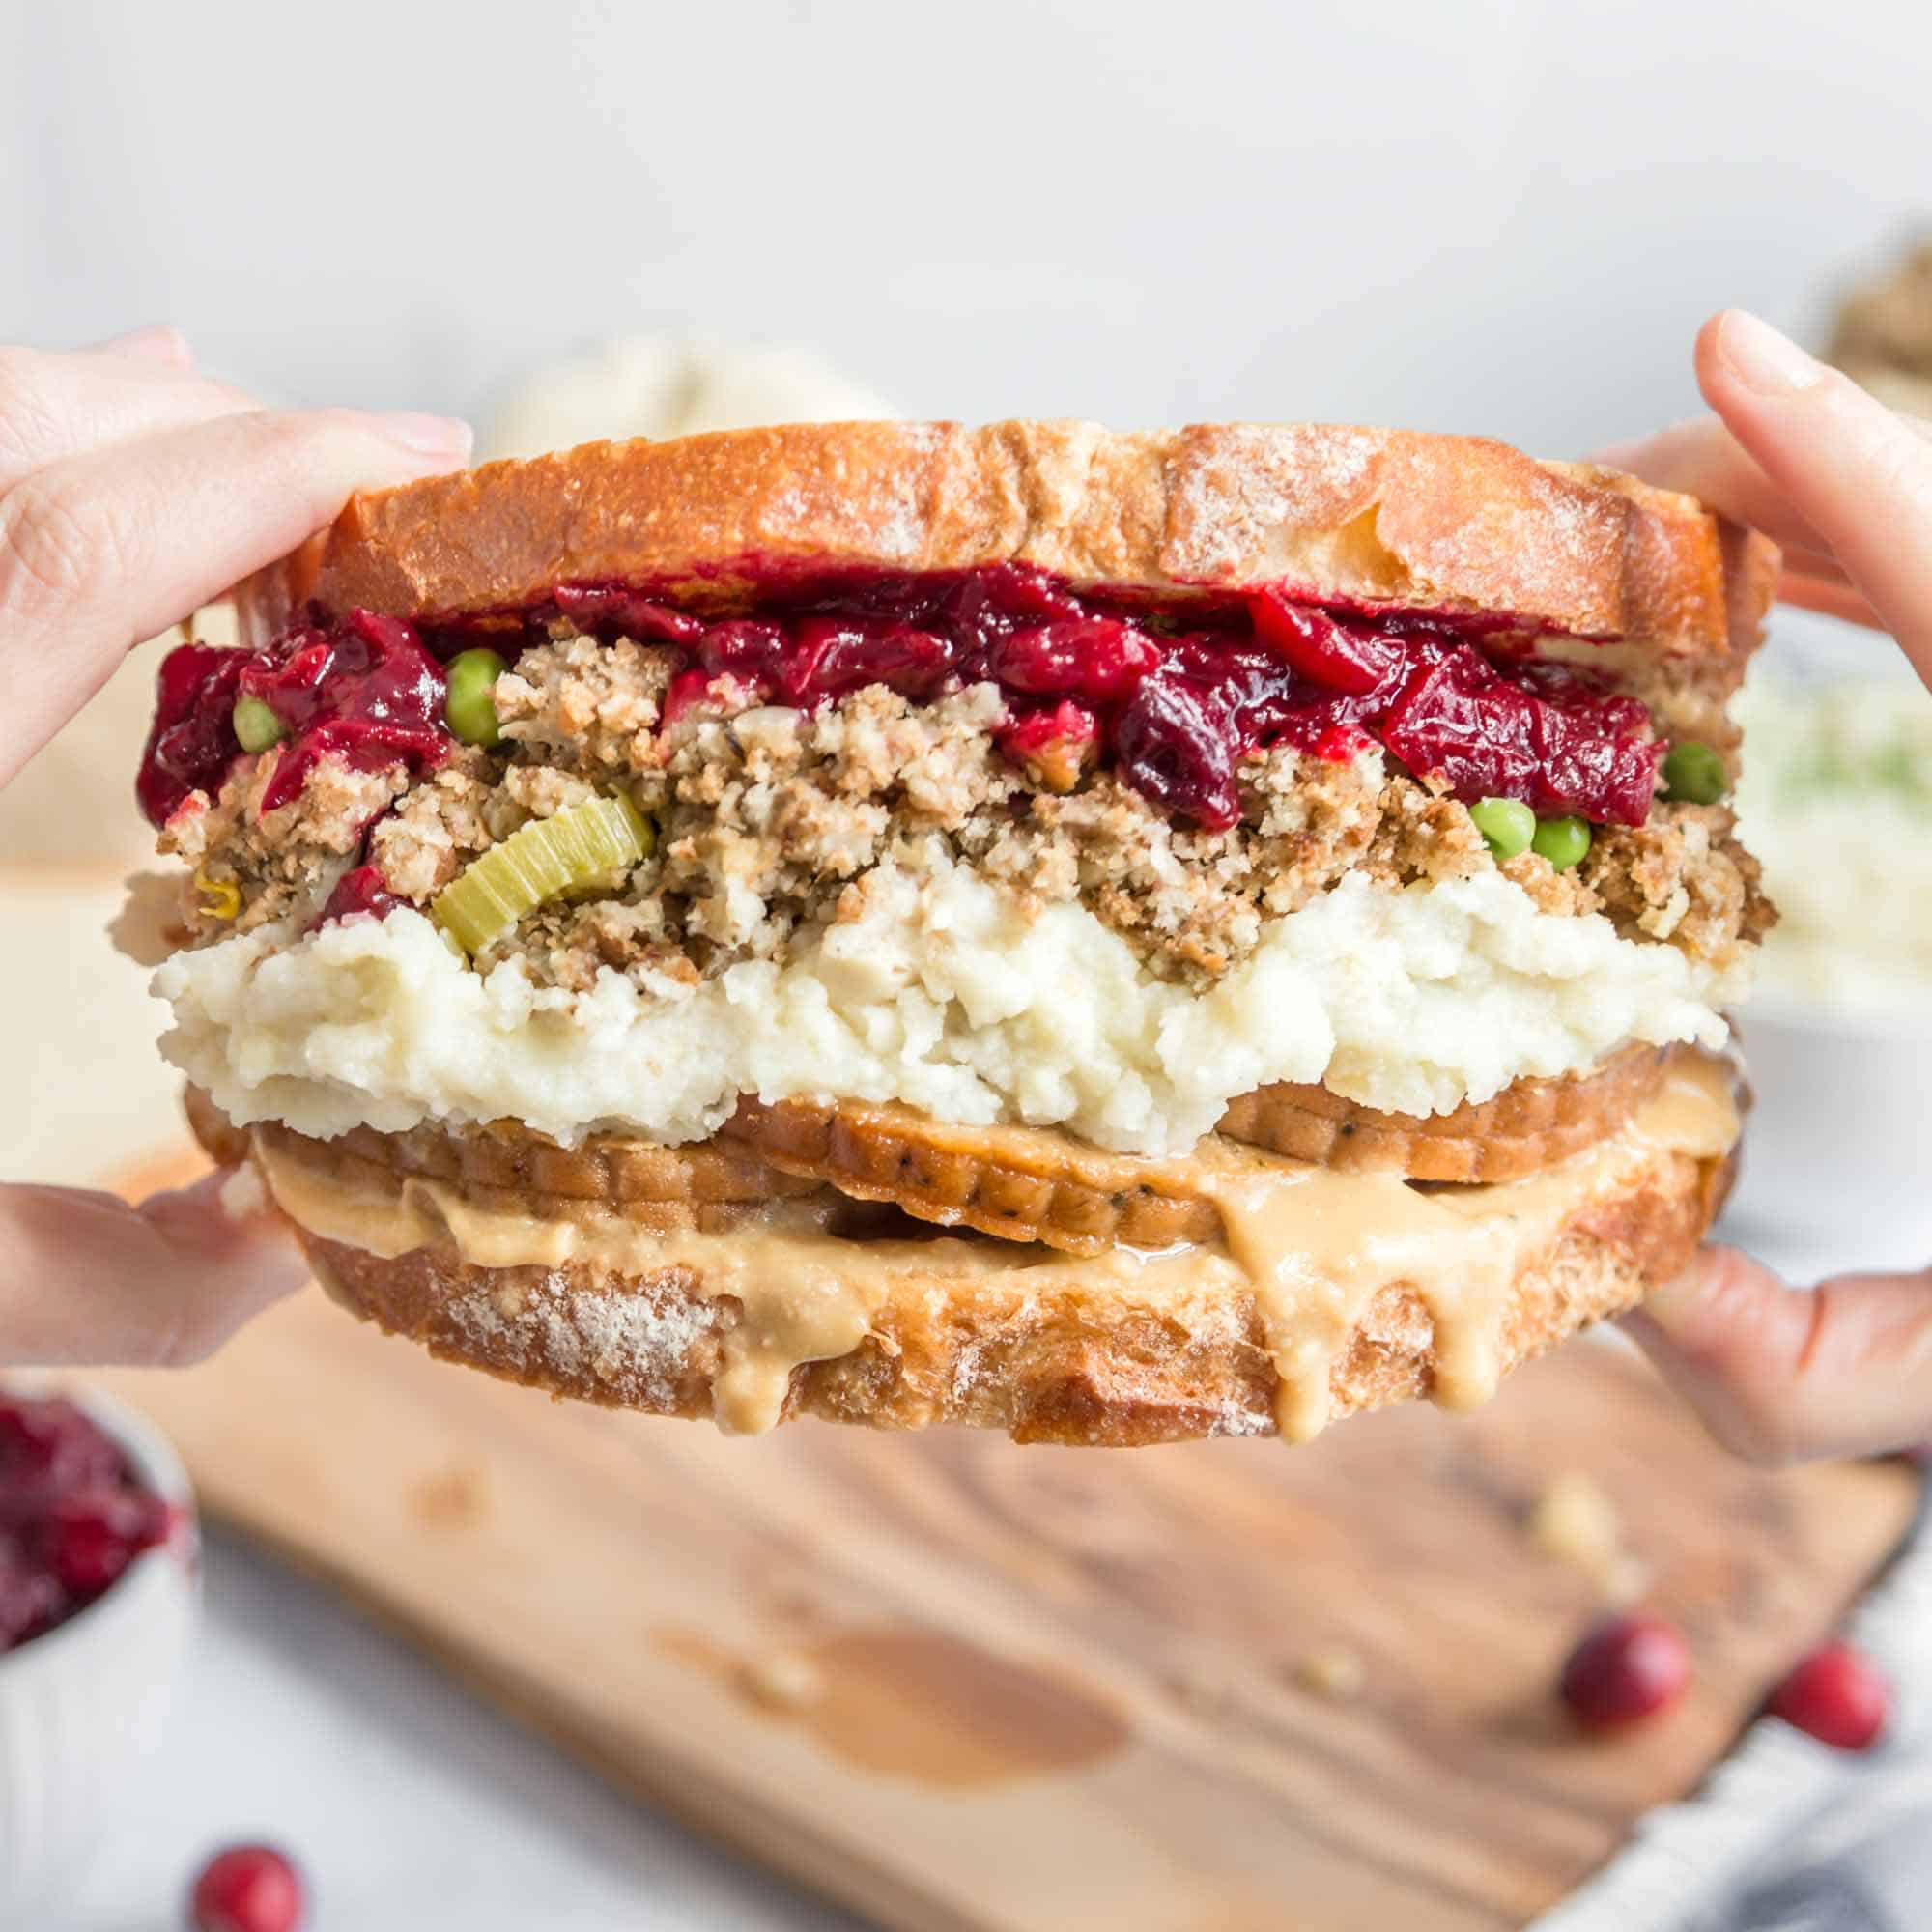 hands holding a thanksgiving leftovers sandwich stuffed with mashed potatoes, stuffing, vegan turkey, and cranberry sauce